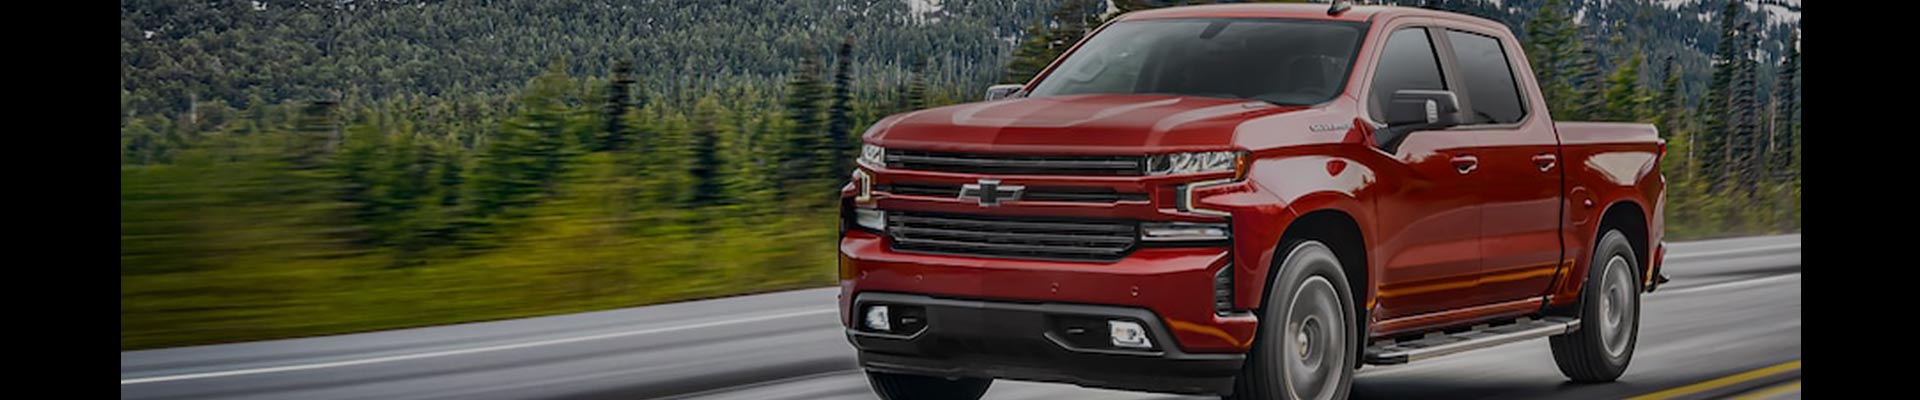 Shop Replacement and OEM 2018 Chevrolet Silverado 1500 Parts with Discounted Price on the Net